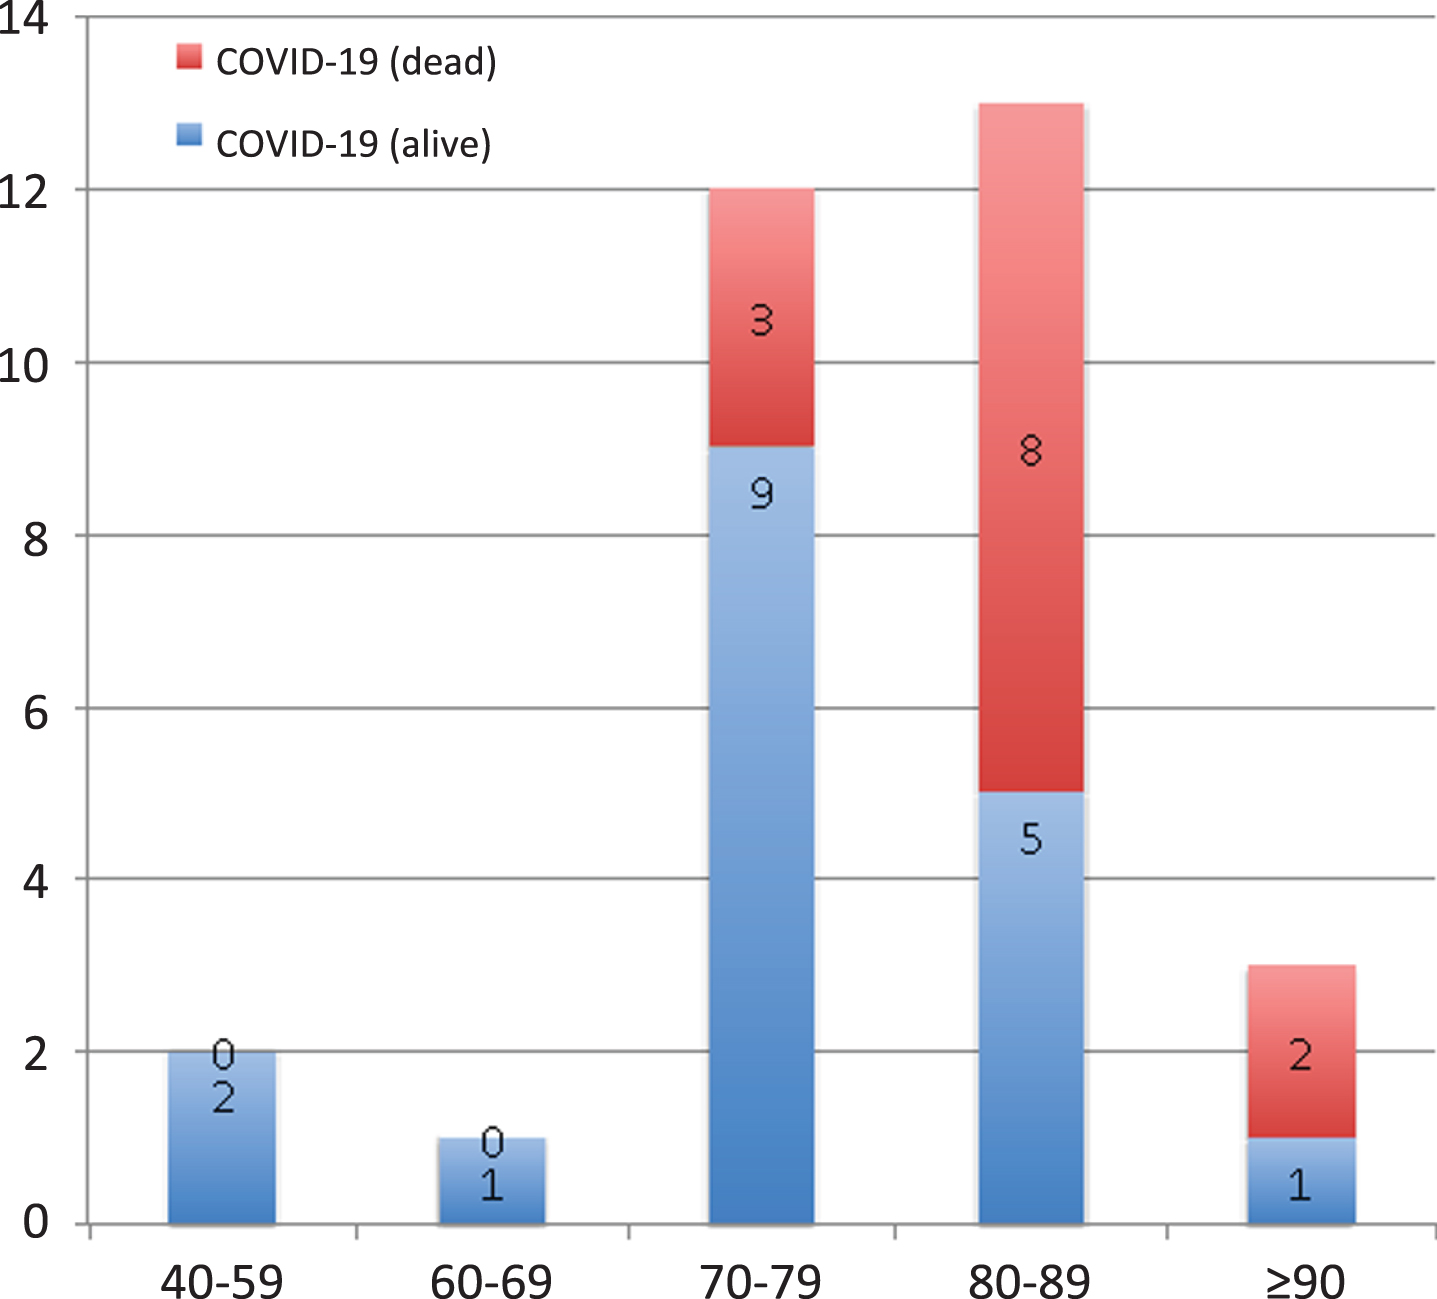 Frequency (absolute) of patients with COVID-19 and outcome considering the different age ranges.